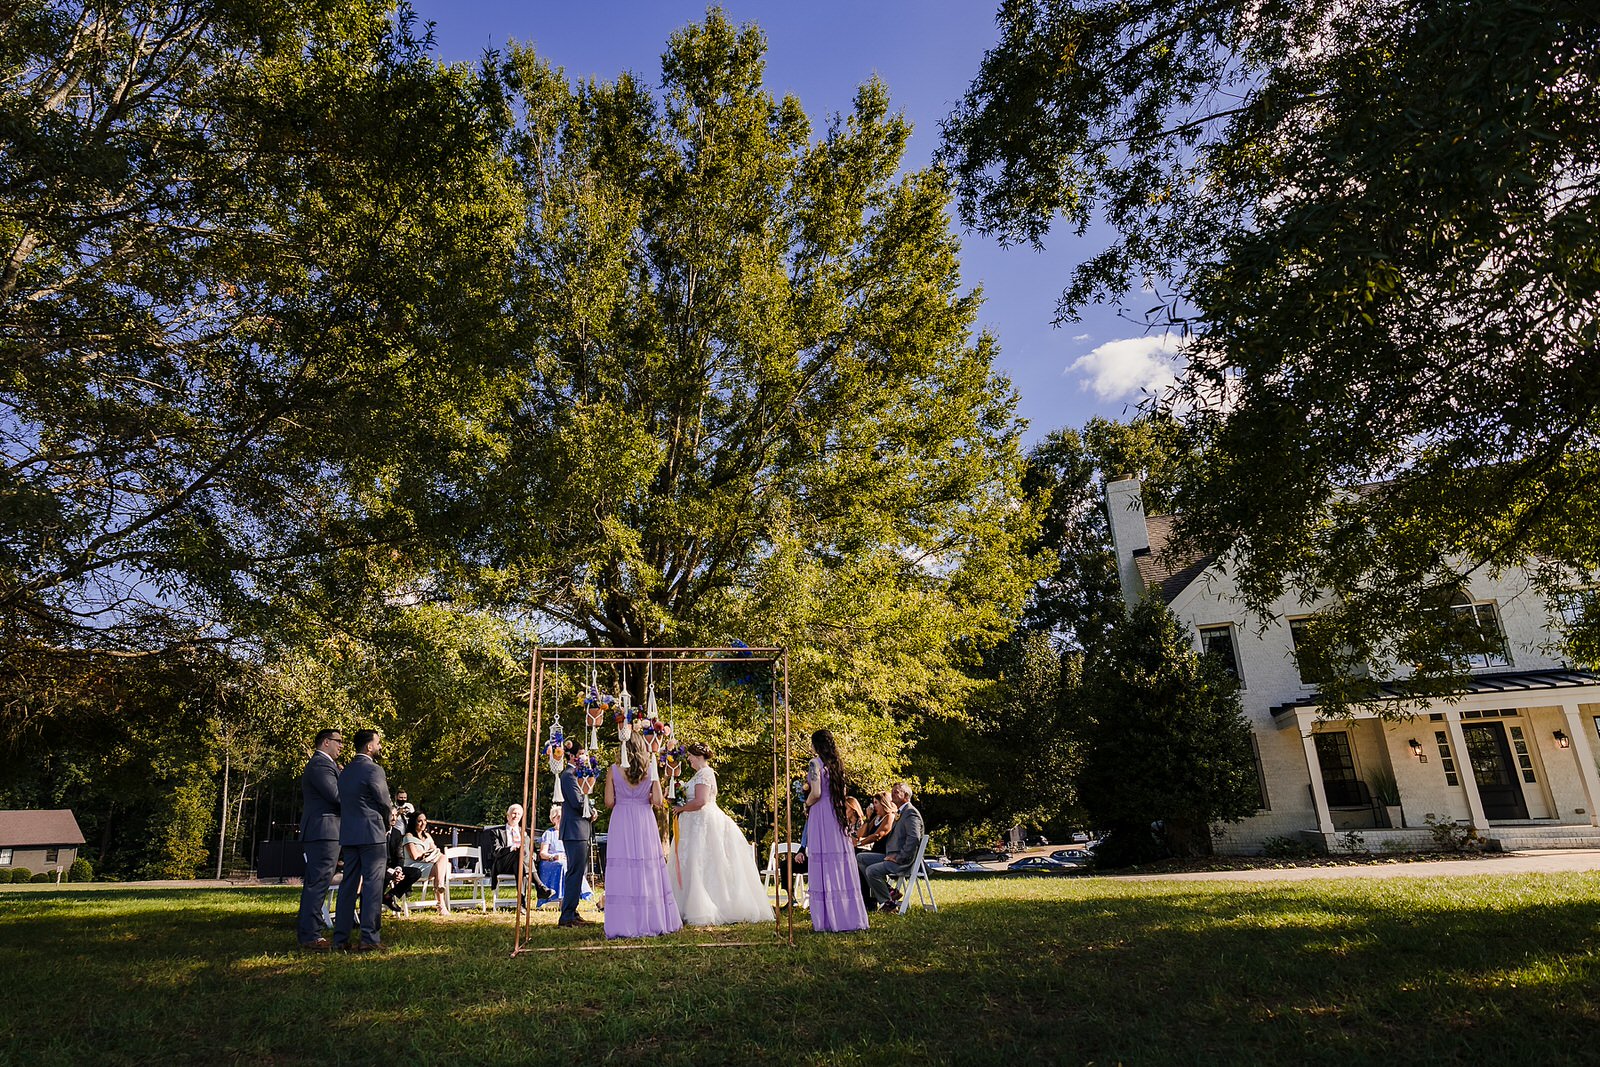 Outdoor wedding ceremony at the Meadows Raleigh